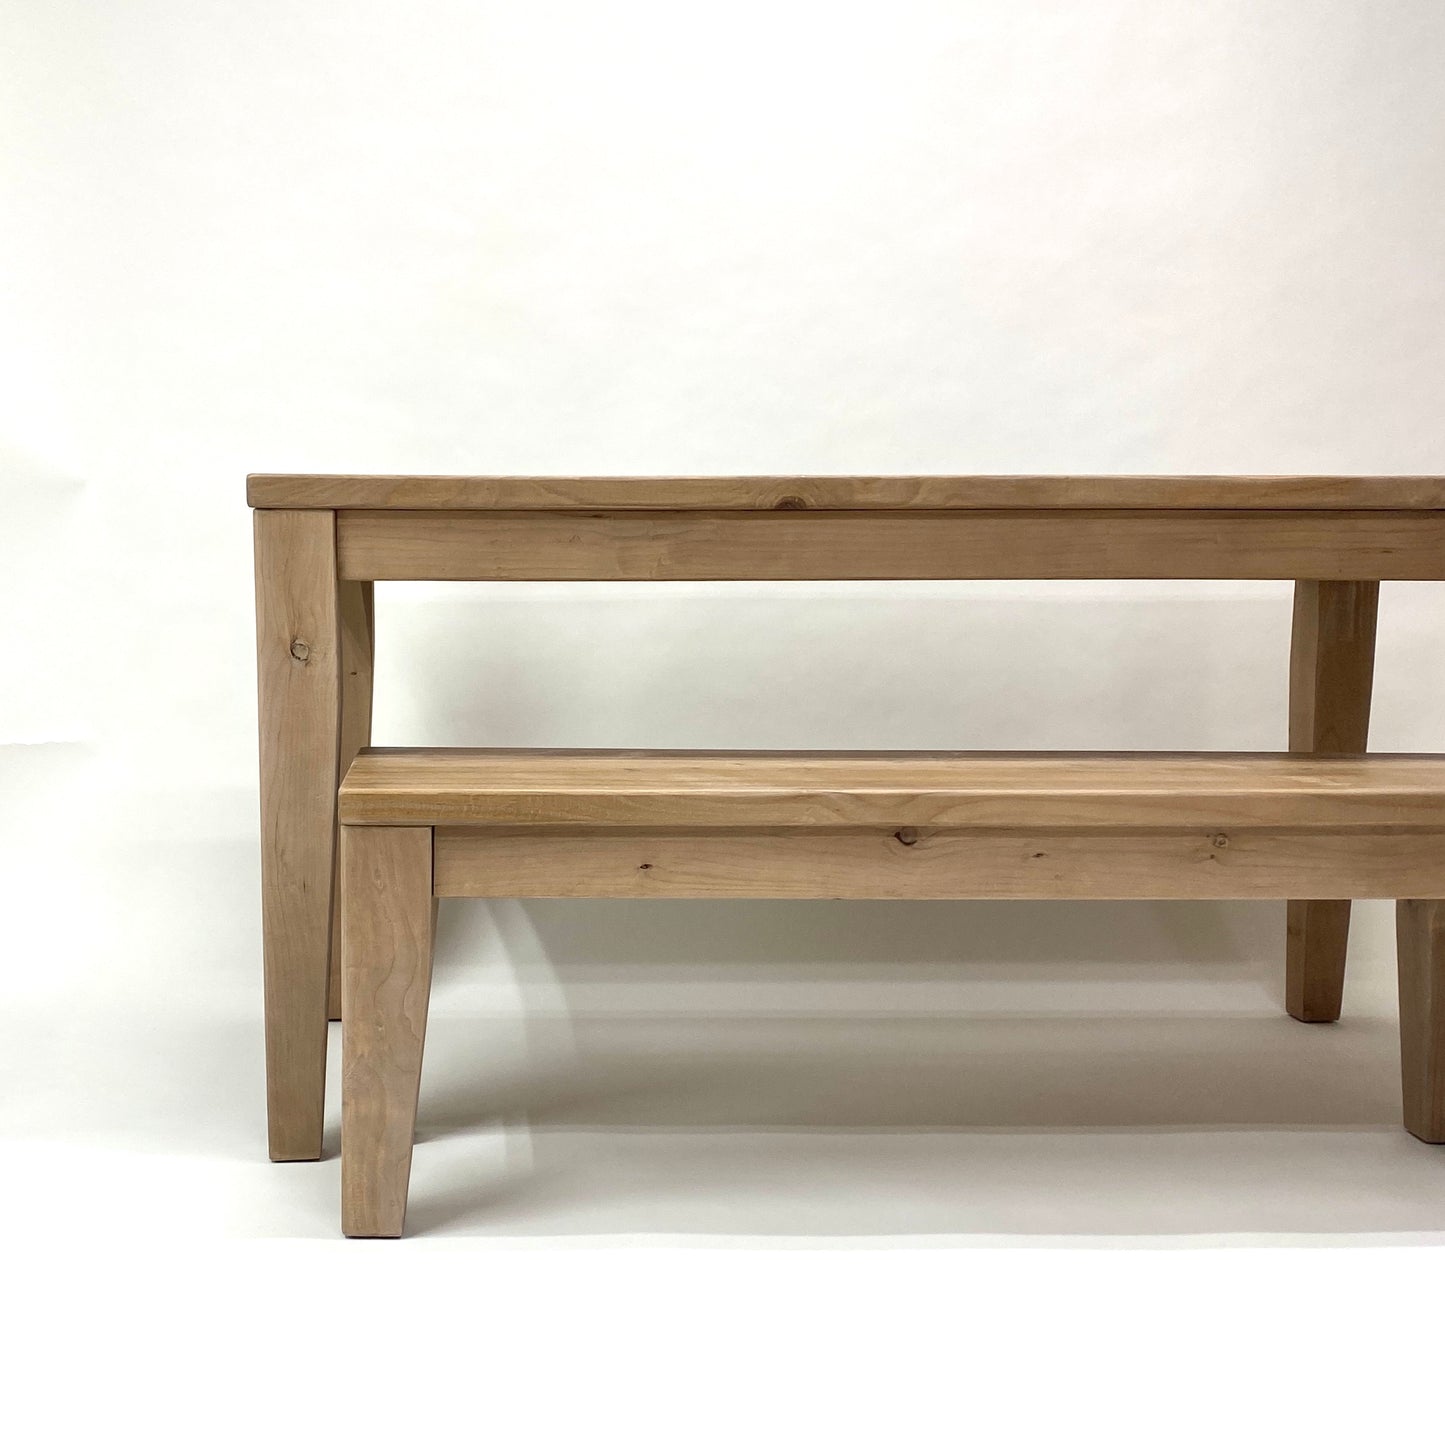 Modern Farmhouse Table and Bench Set